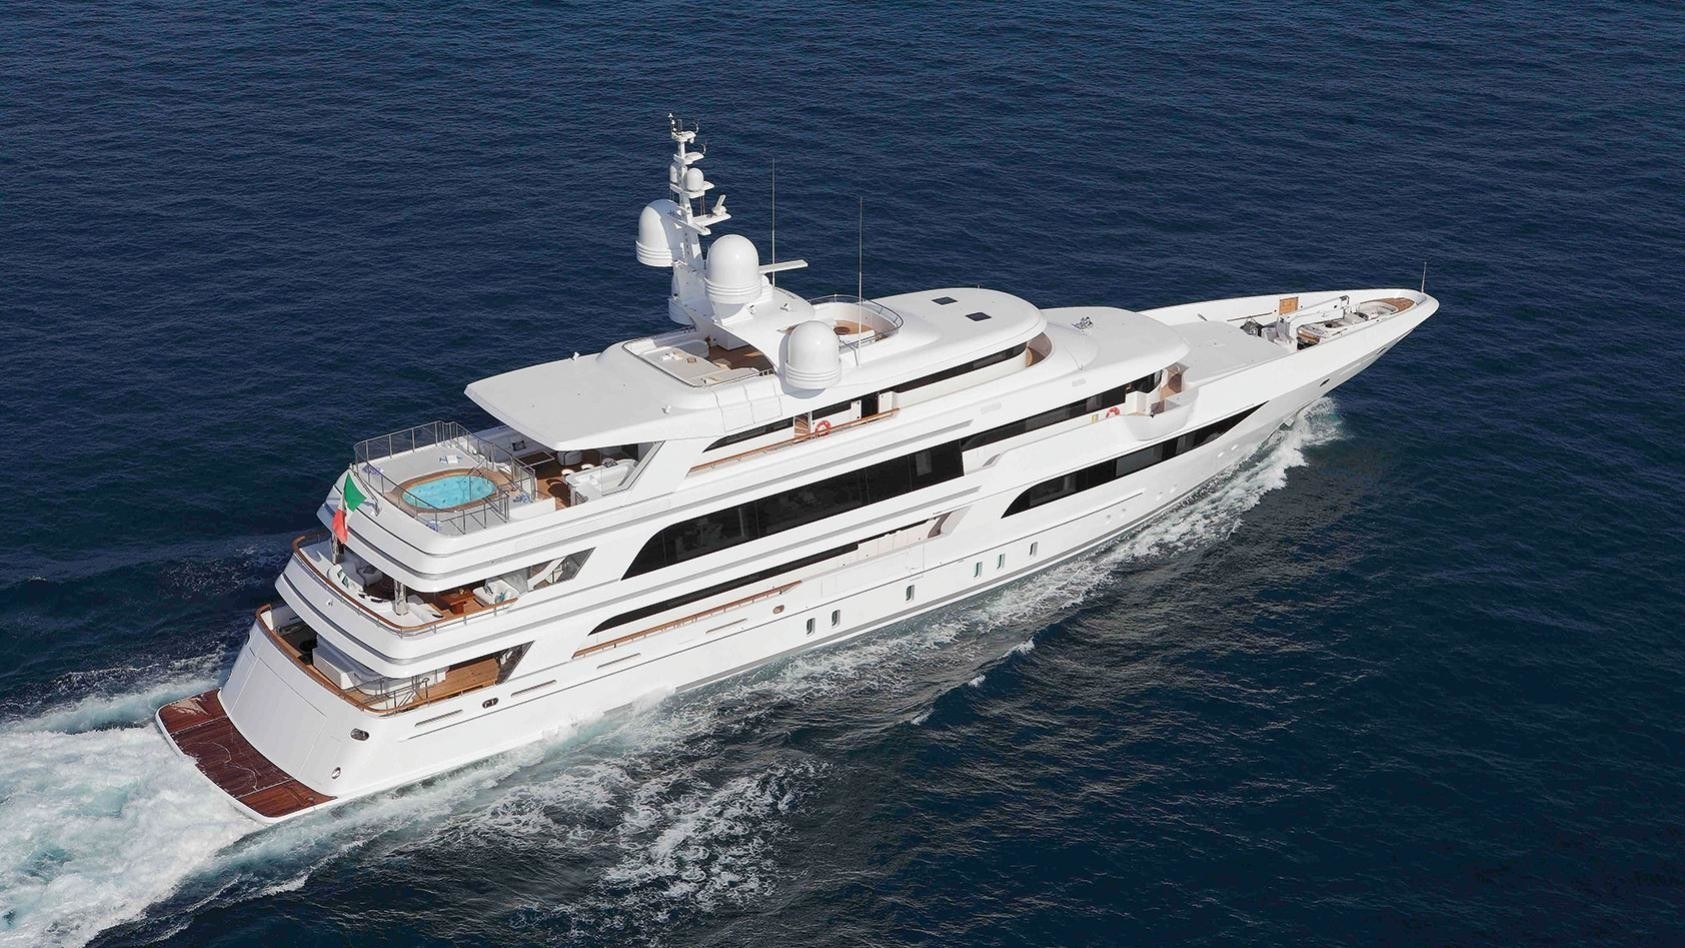 The 64m Yacht